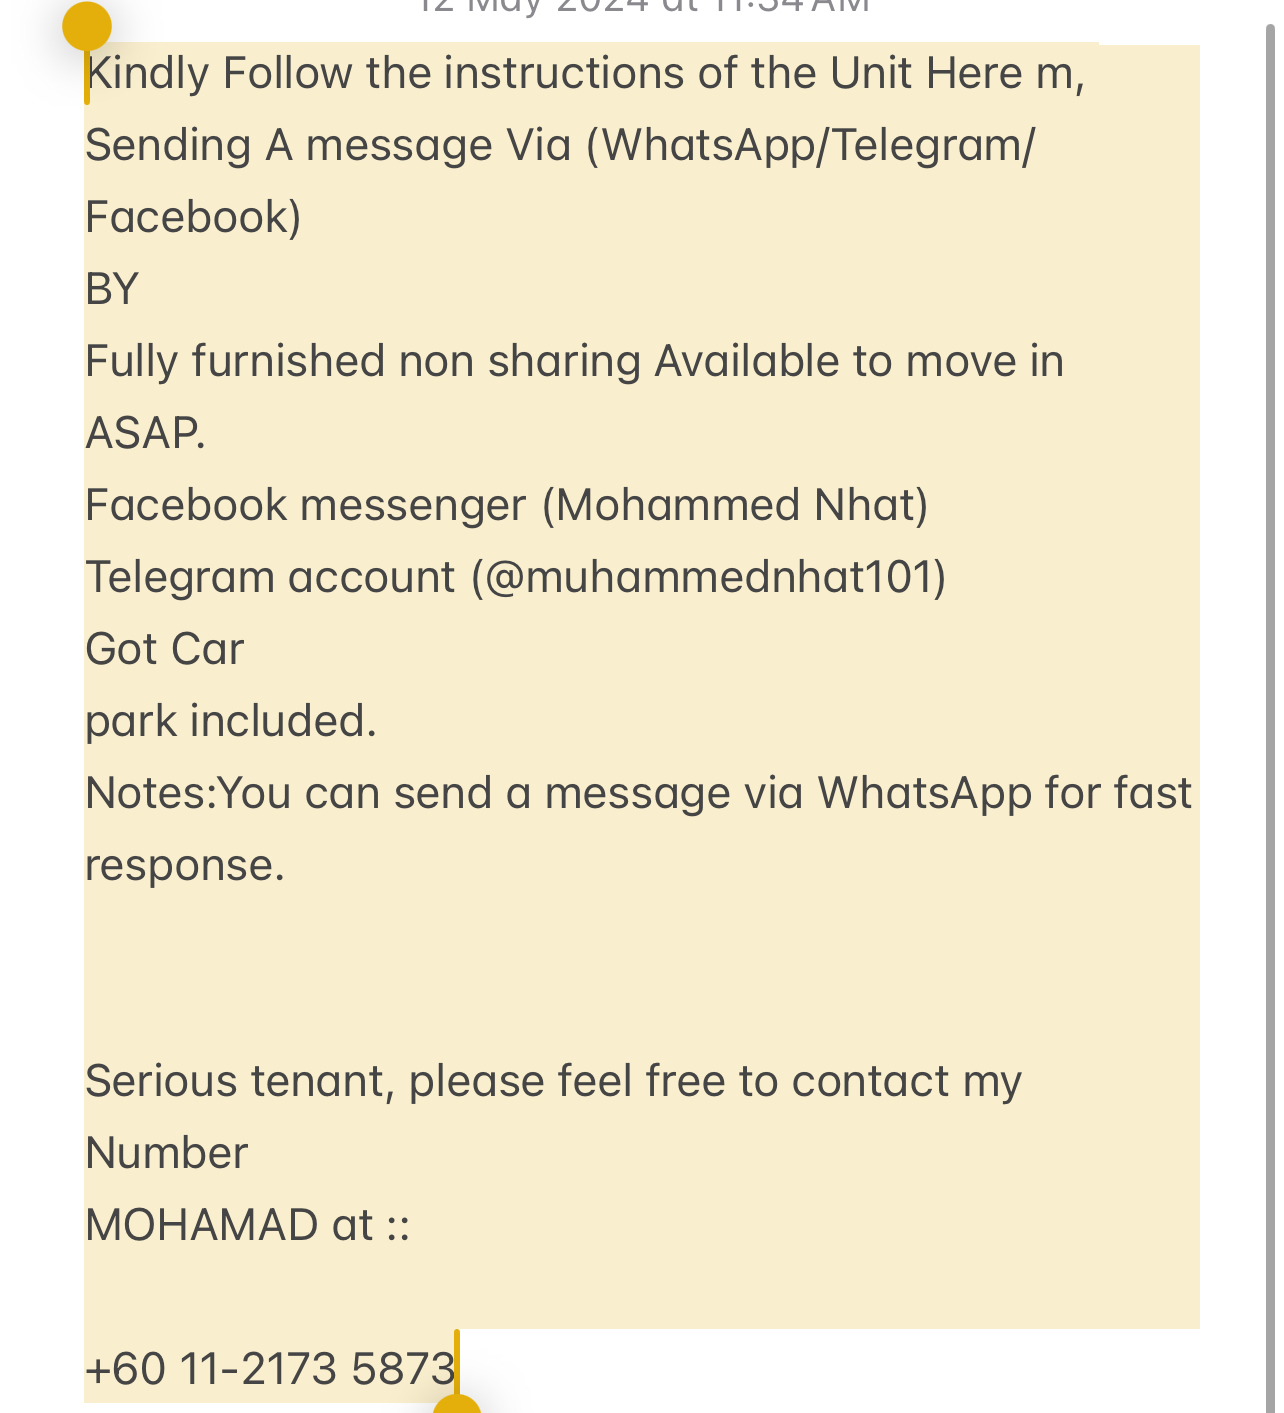 room for rent, single room, oriental village, Send the owner a message on WhatsApp/facebook if you want to RENT the unit facebook (Mohammed Nhat)&Telegram(@muhammednhat101) Fully furnished non sharing :(comfortable)